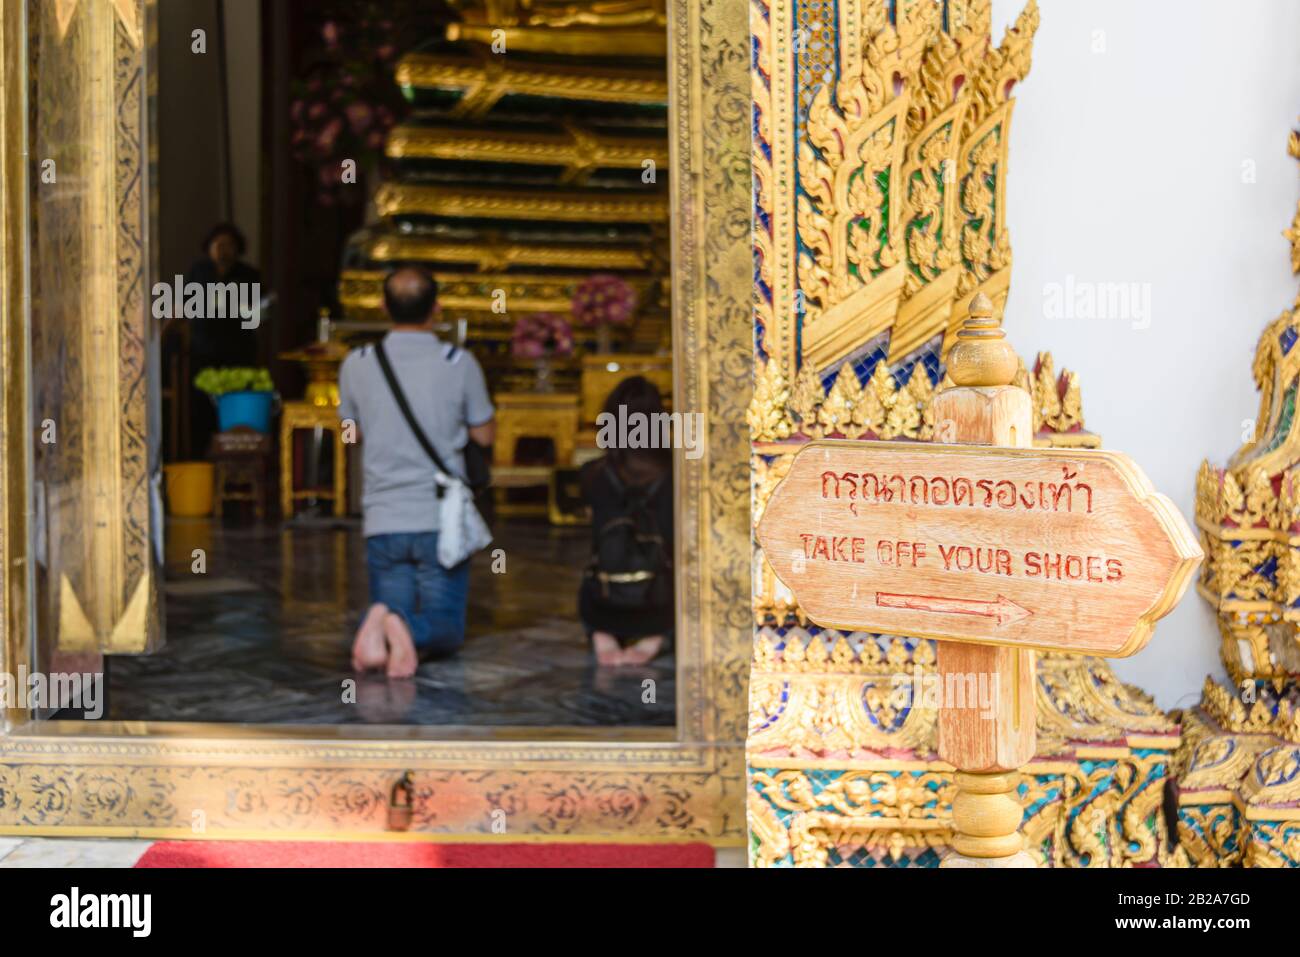 Sign at a Buddhist temple asking people to take off their shoes, Wat Pho, Bangkok, Thailand Stock Photo